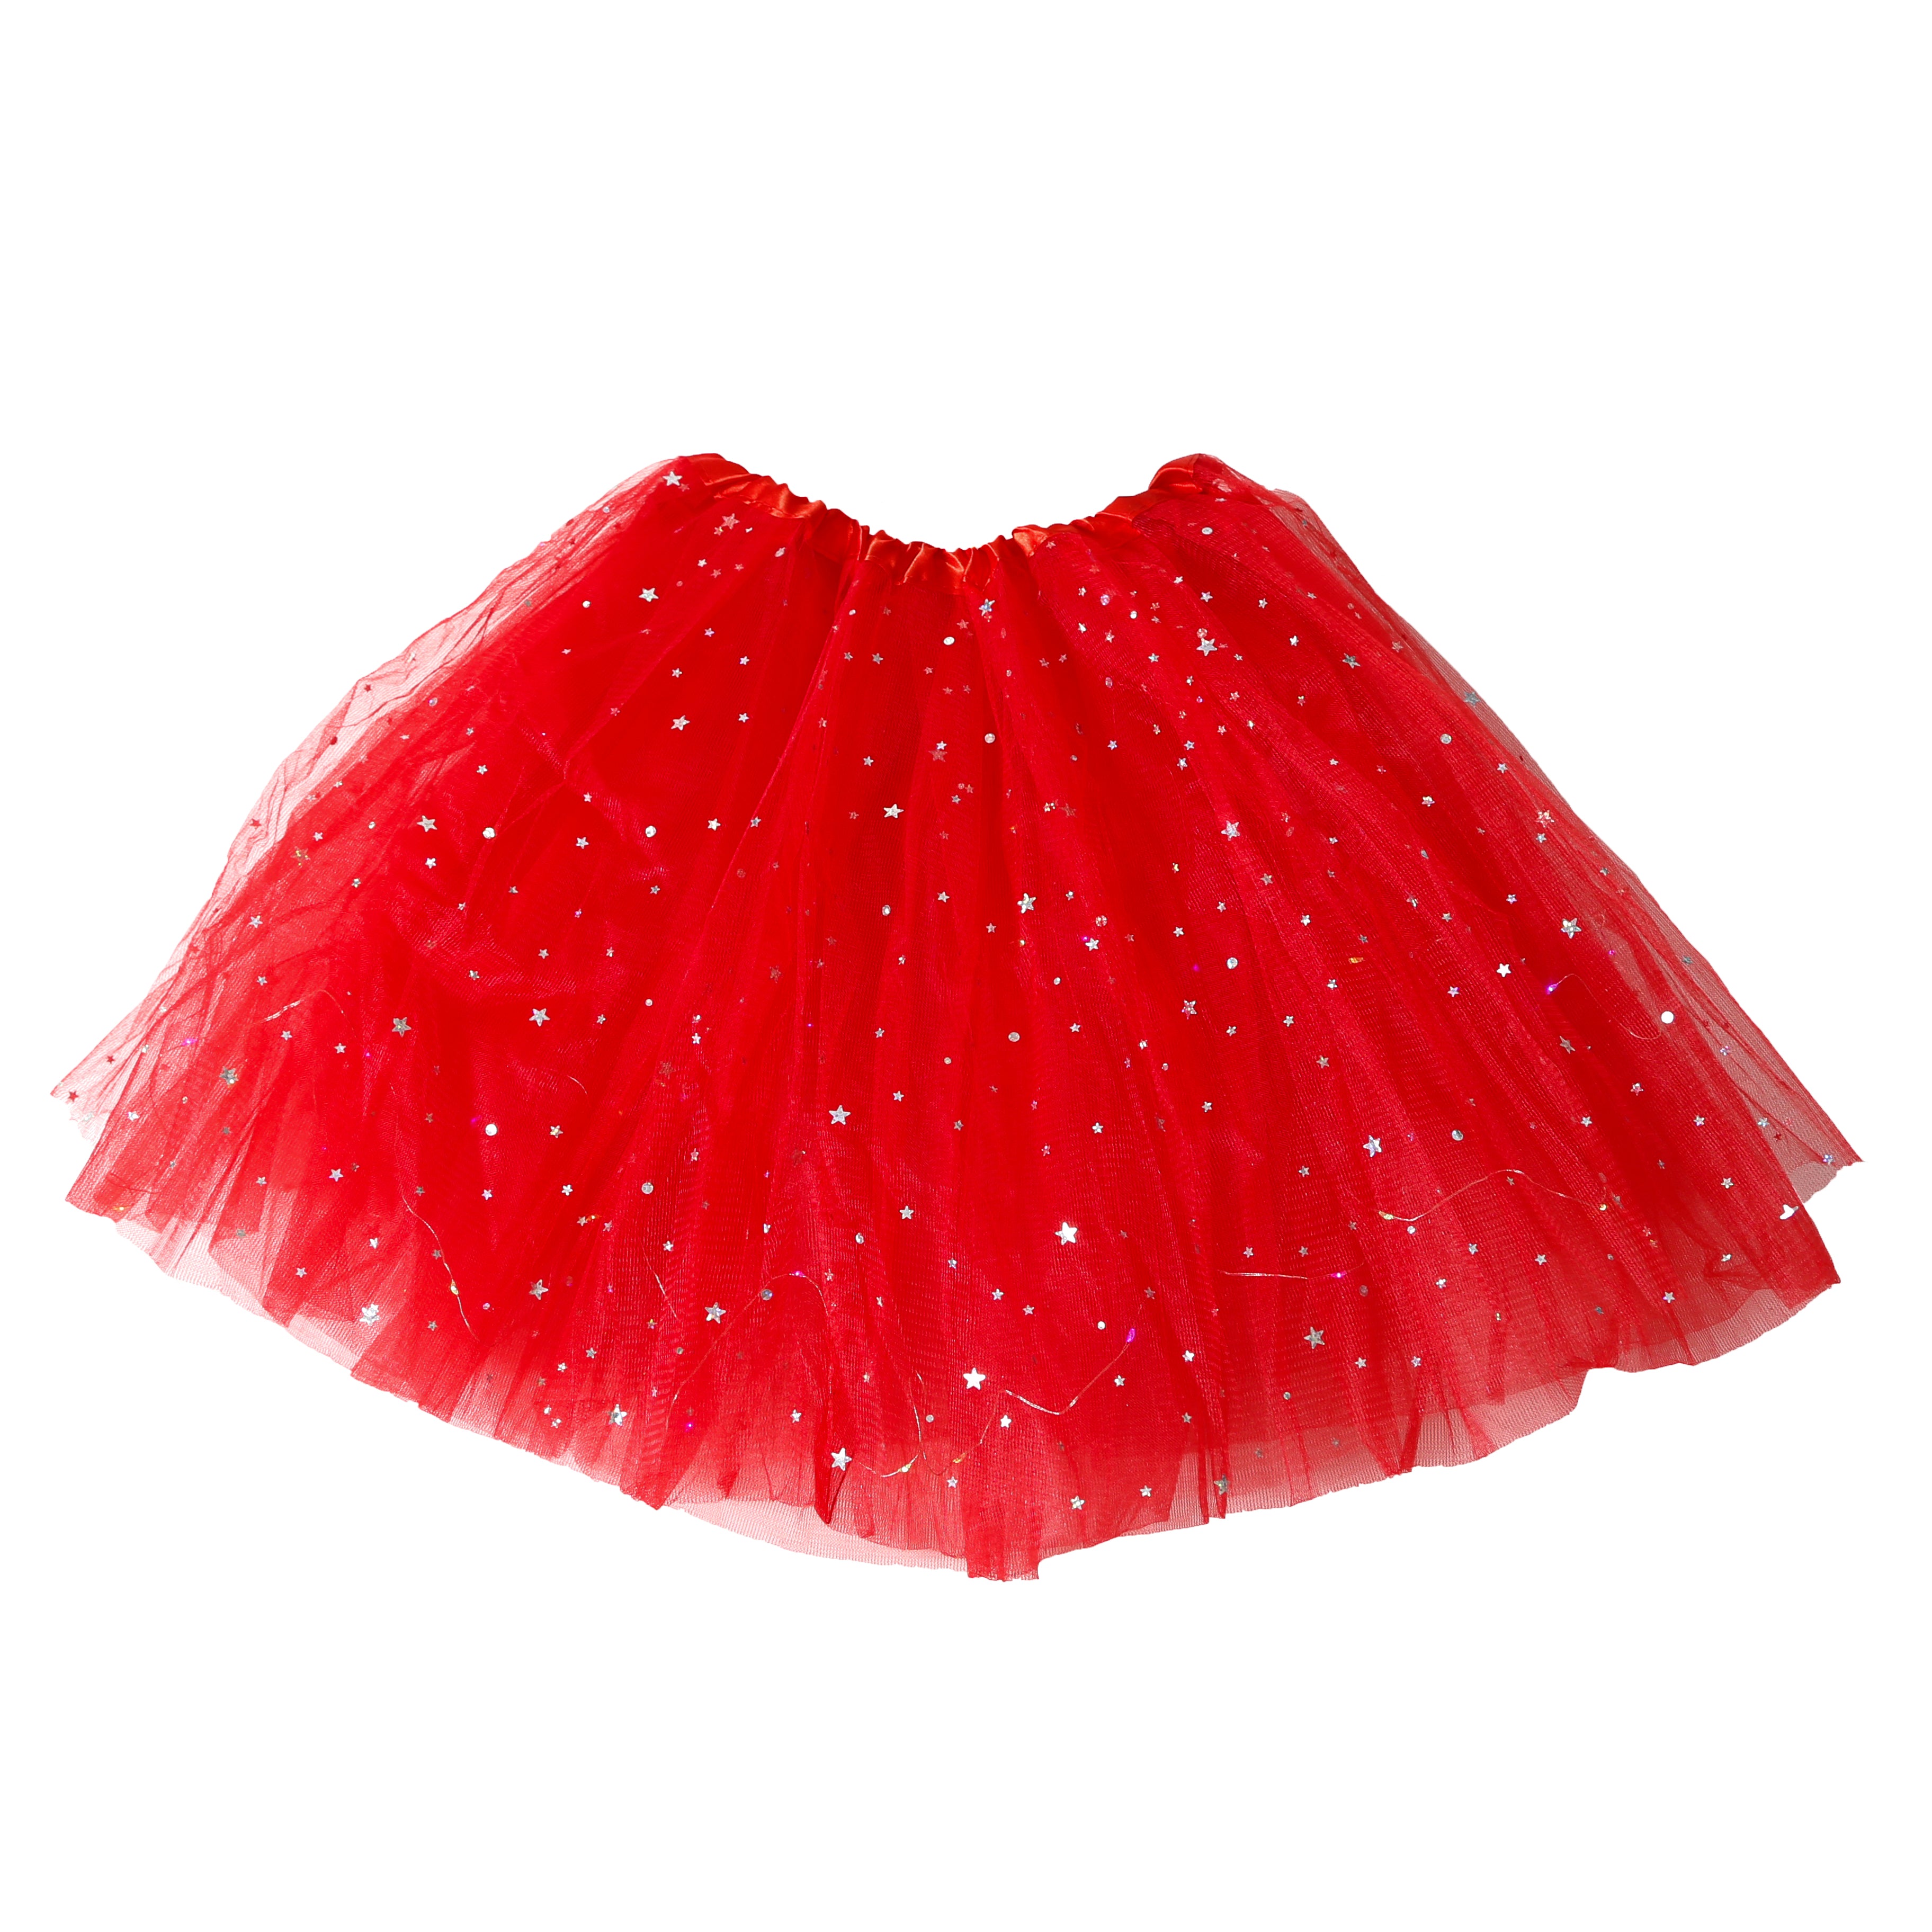 red light up LED tutu skirt Electro Glow | South Africa's Best LED Festival Gear & Rave Clothes - festivals outfits, clothes festival, festival clothing south africa, festival ideas outfits, festival outfits rave, festival wear, steam punk goggle, rave glasses, outfit for a rave, kaleidoscope glasses, diffraction glasses, clothes for a rave, rave sunglasses, spectral glasses, rave goggles, clothes for a rave, rave clothing south africa, festival wear south africa, accessories festival, rave sunglasses